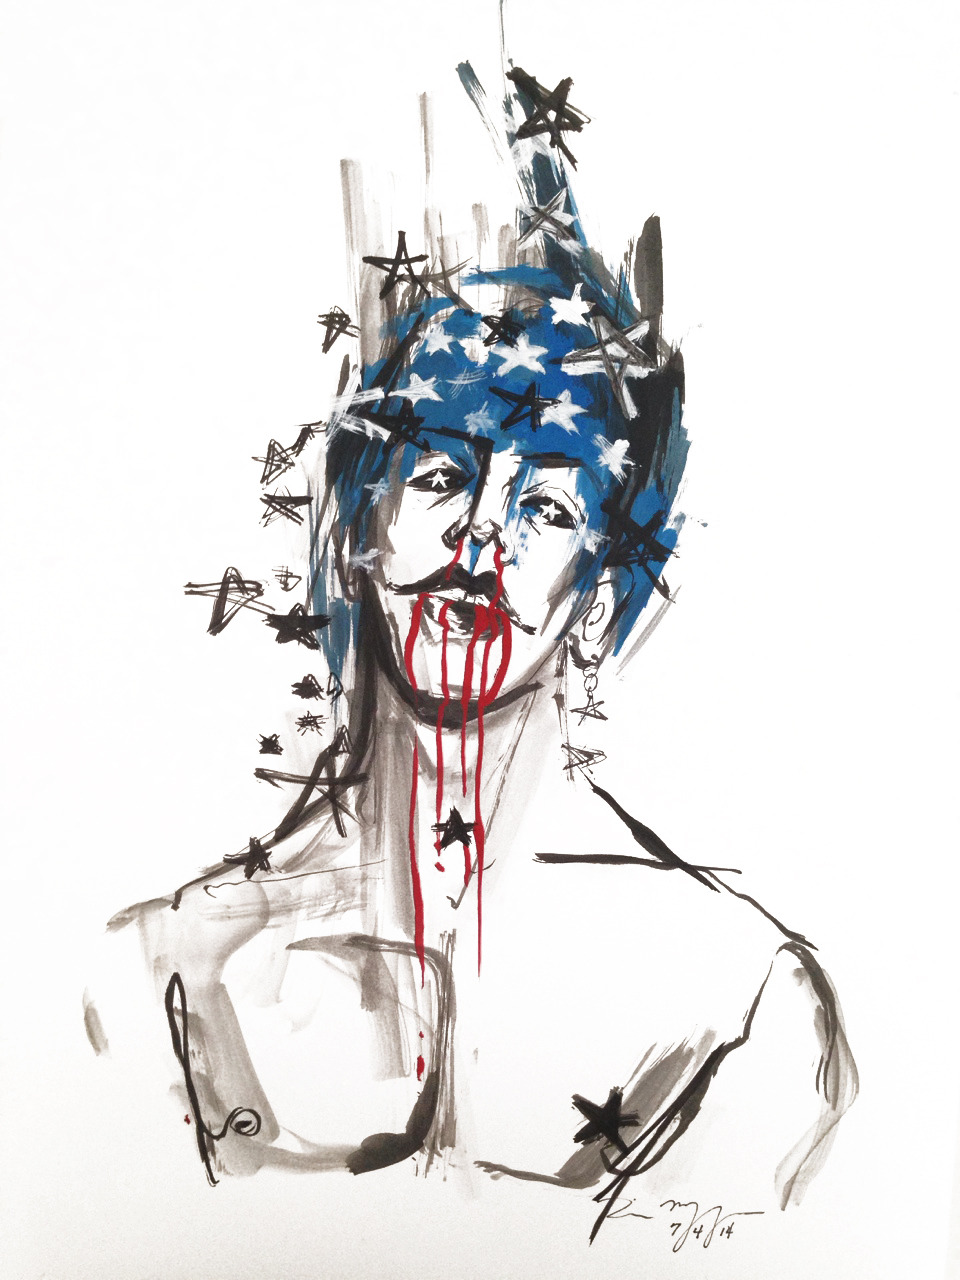 timtdesigns:
“ Stars and Stripes. Ink, gouache, 11x17.
”